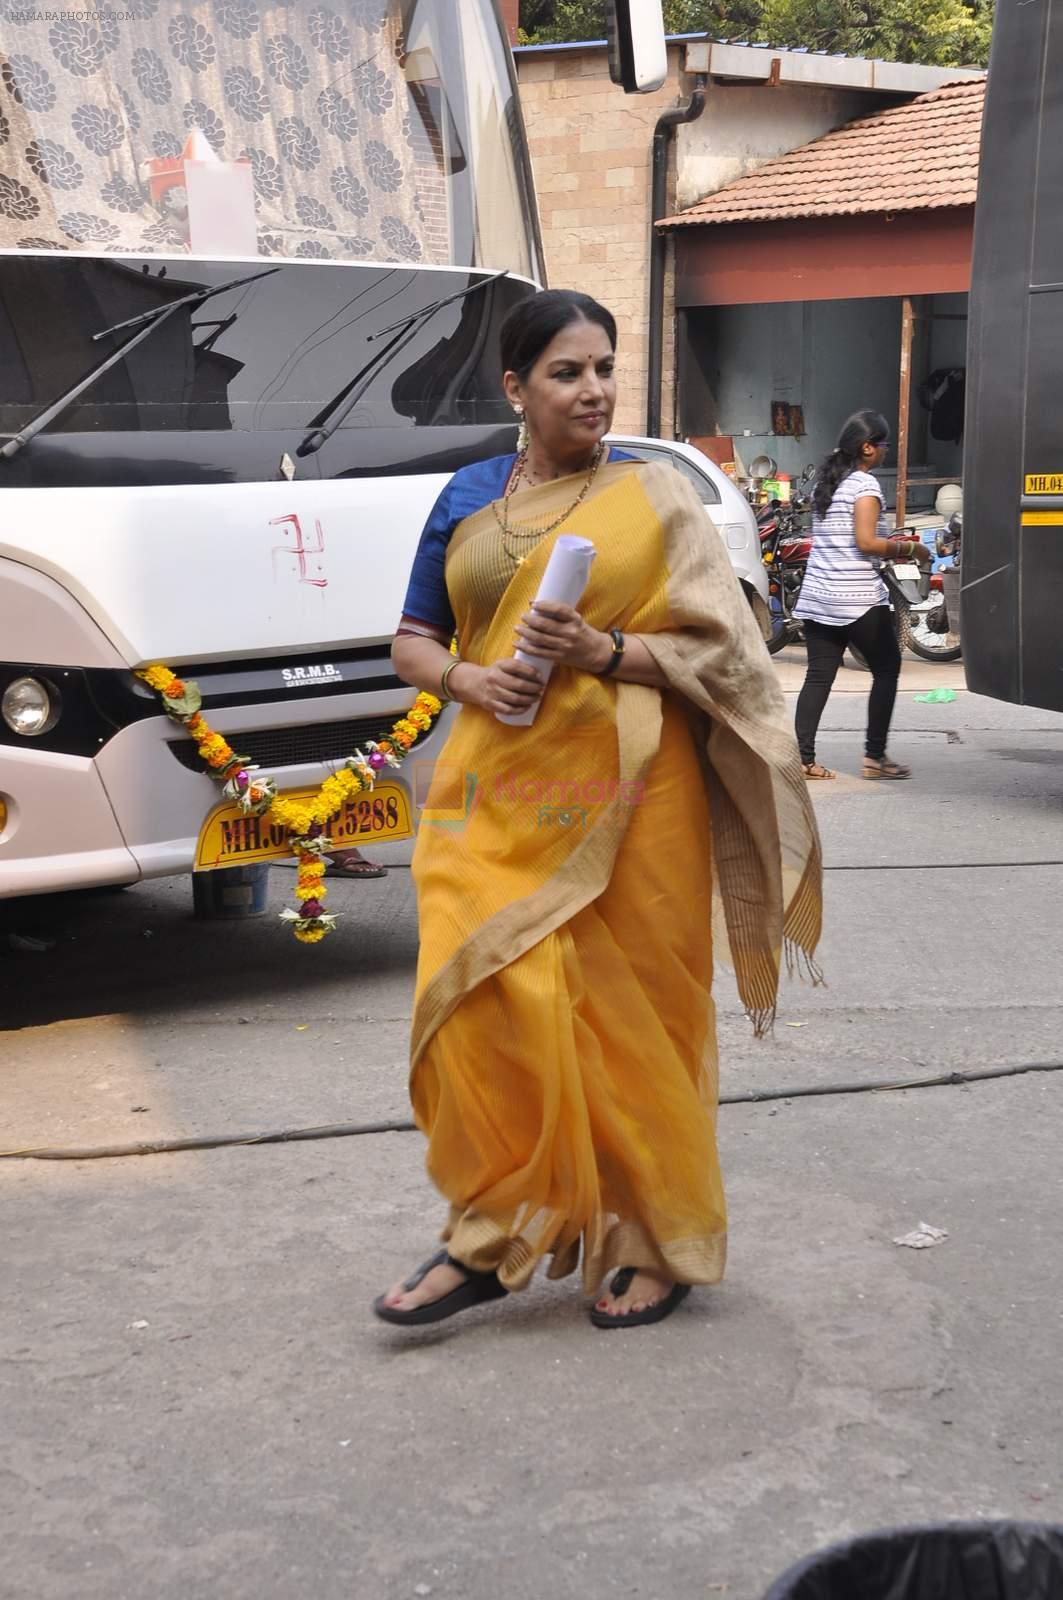 Shabana Azmi on location of Chalk and Duster film on 23rd Oct 2015